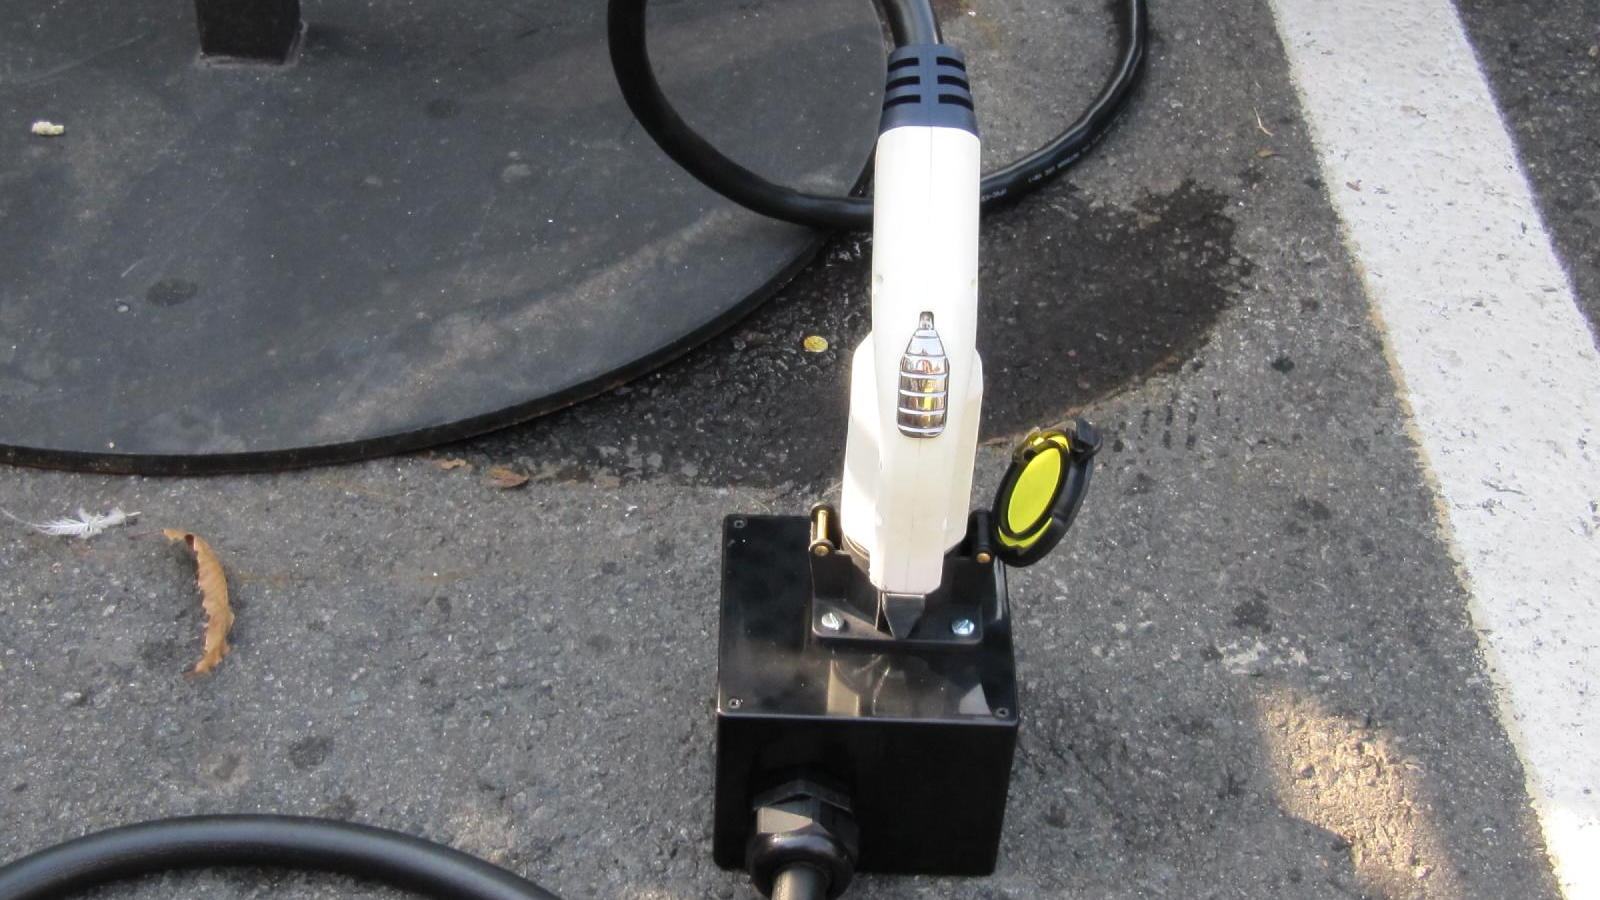 Home-made J-1772 adaptor for Tesla Roadster charging cord, built and used by Michael Thwaite